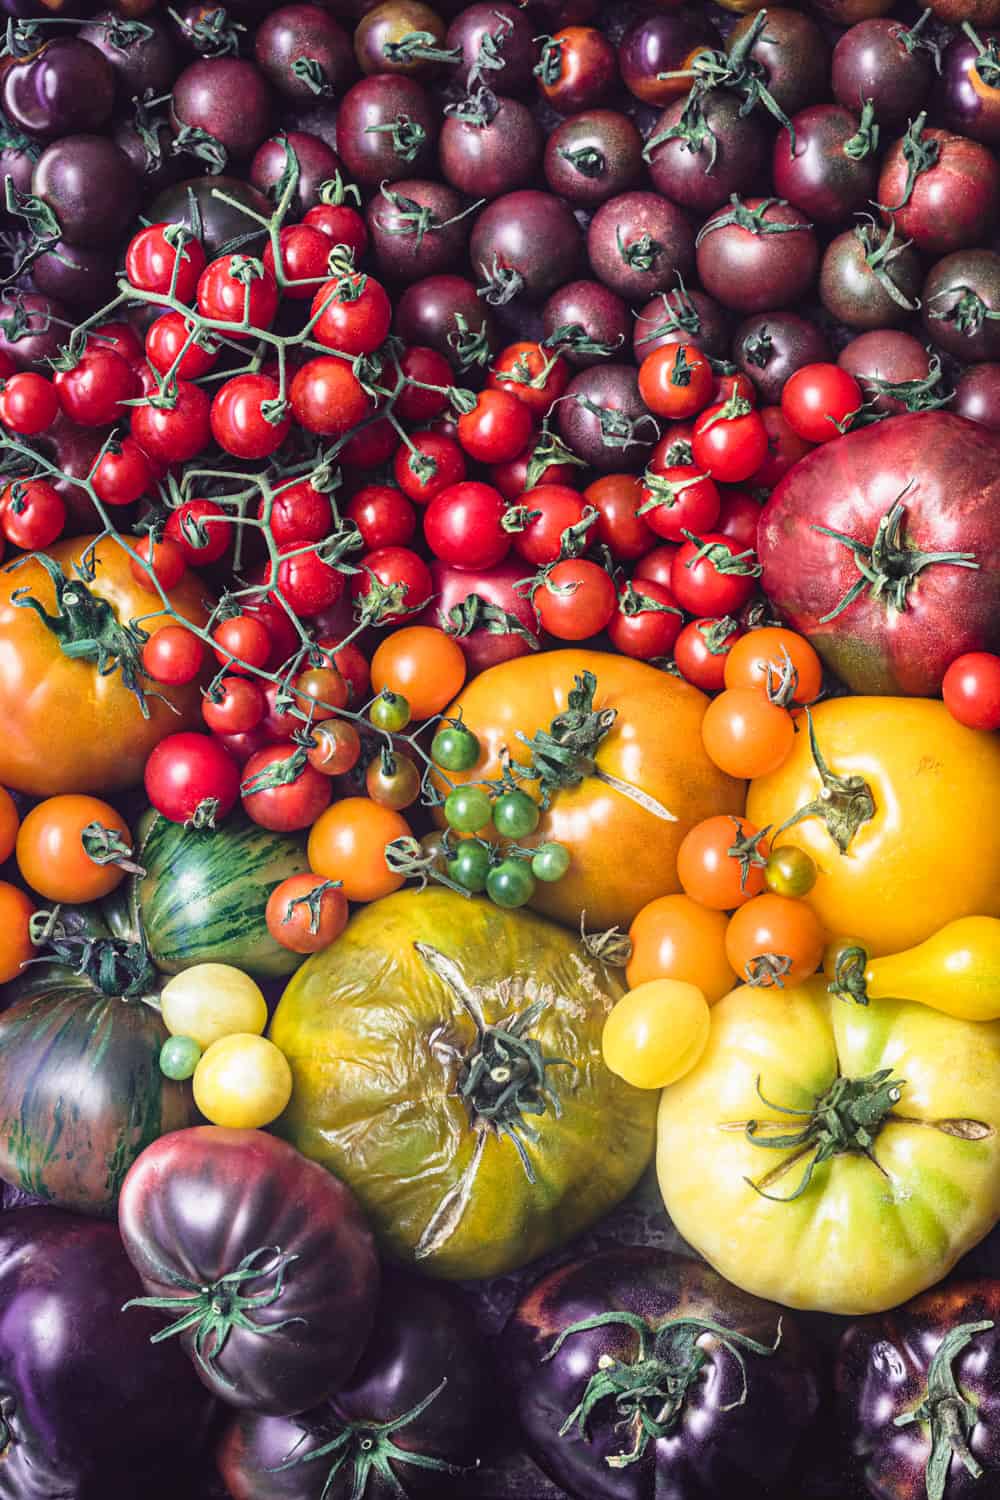 red, orange, yellow, green and purple fresh and whole tomatoes arranged like a rainbow.